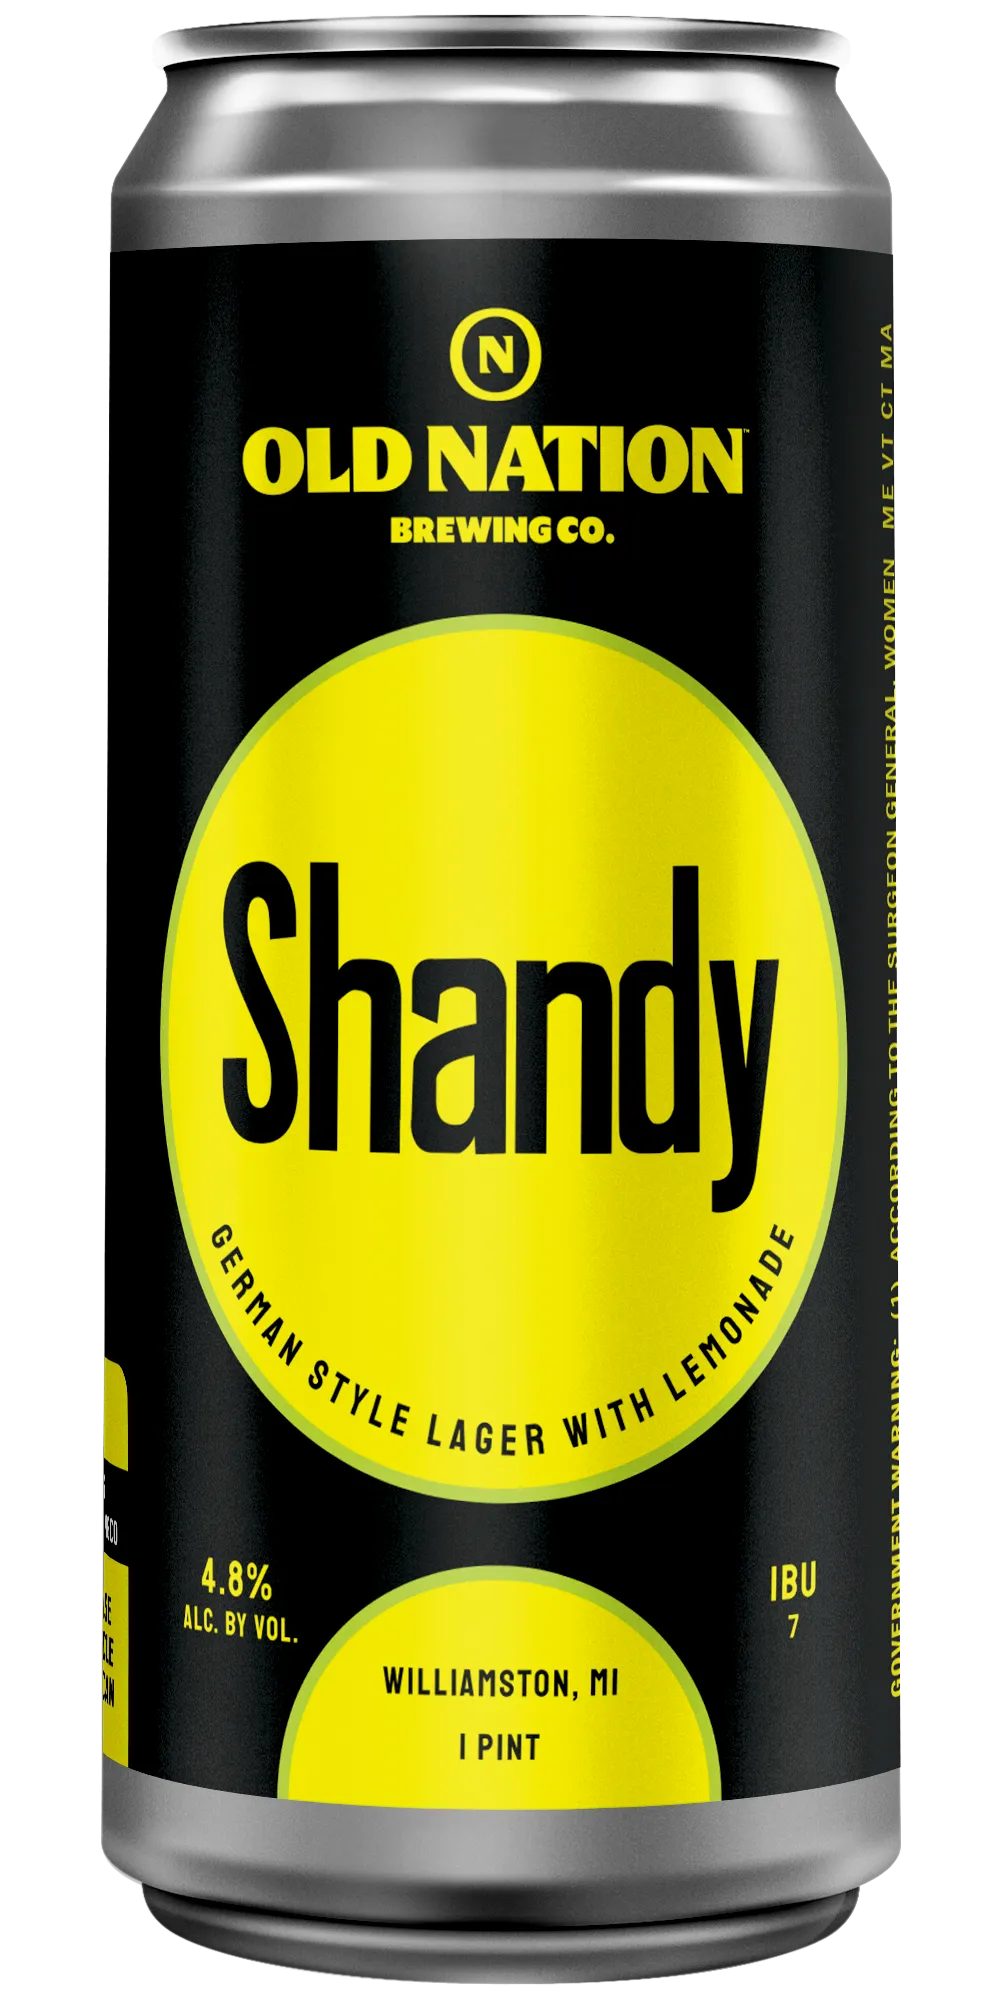 Old Nation Shandy beer in an aluminum can